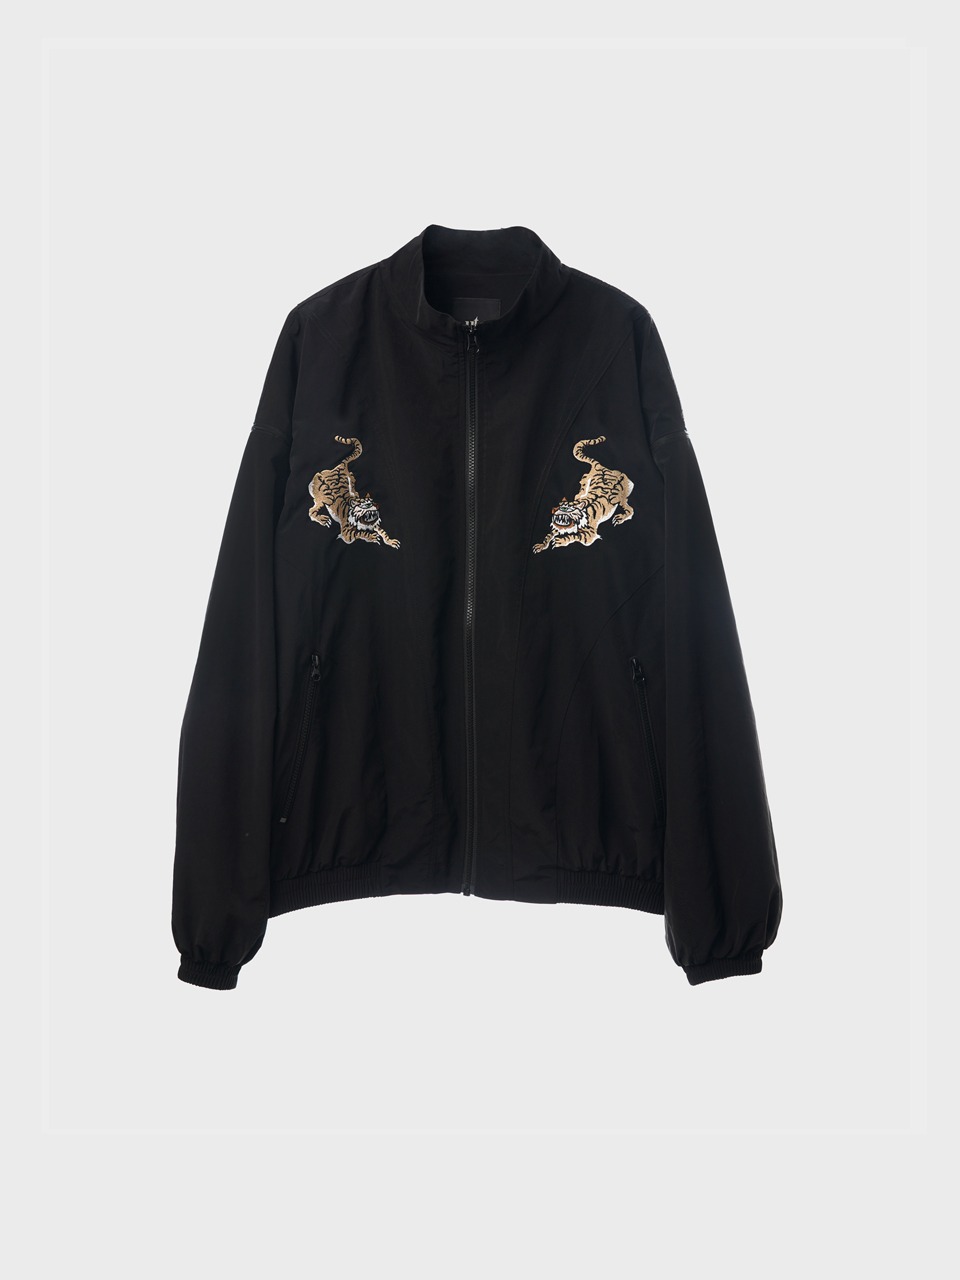 Tiger Embroidery Multizippered Jacket